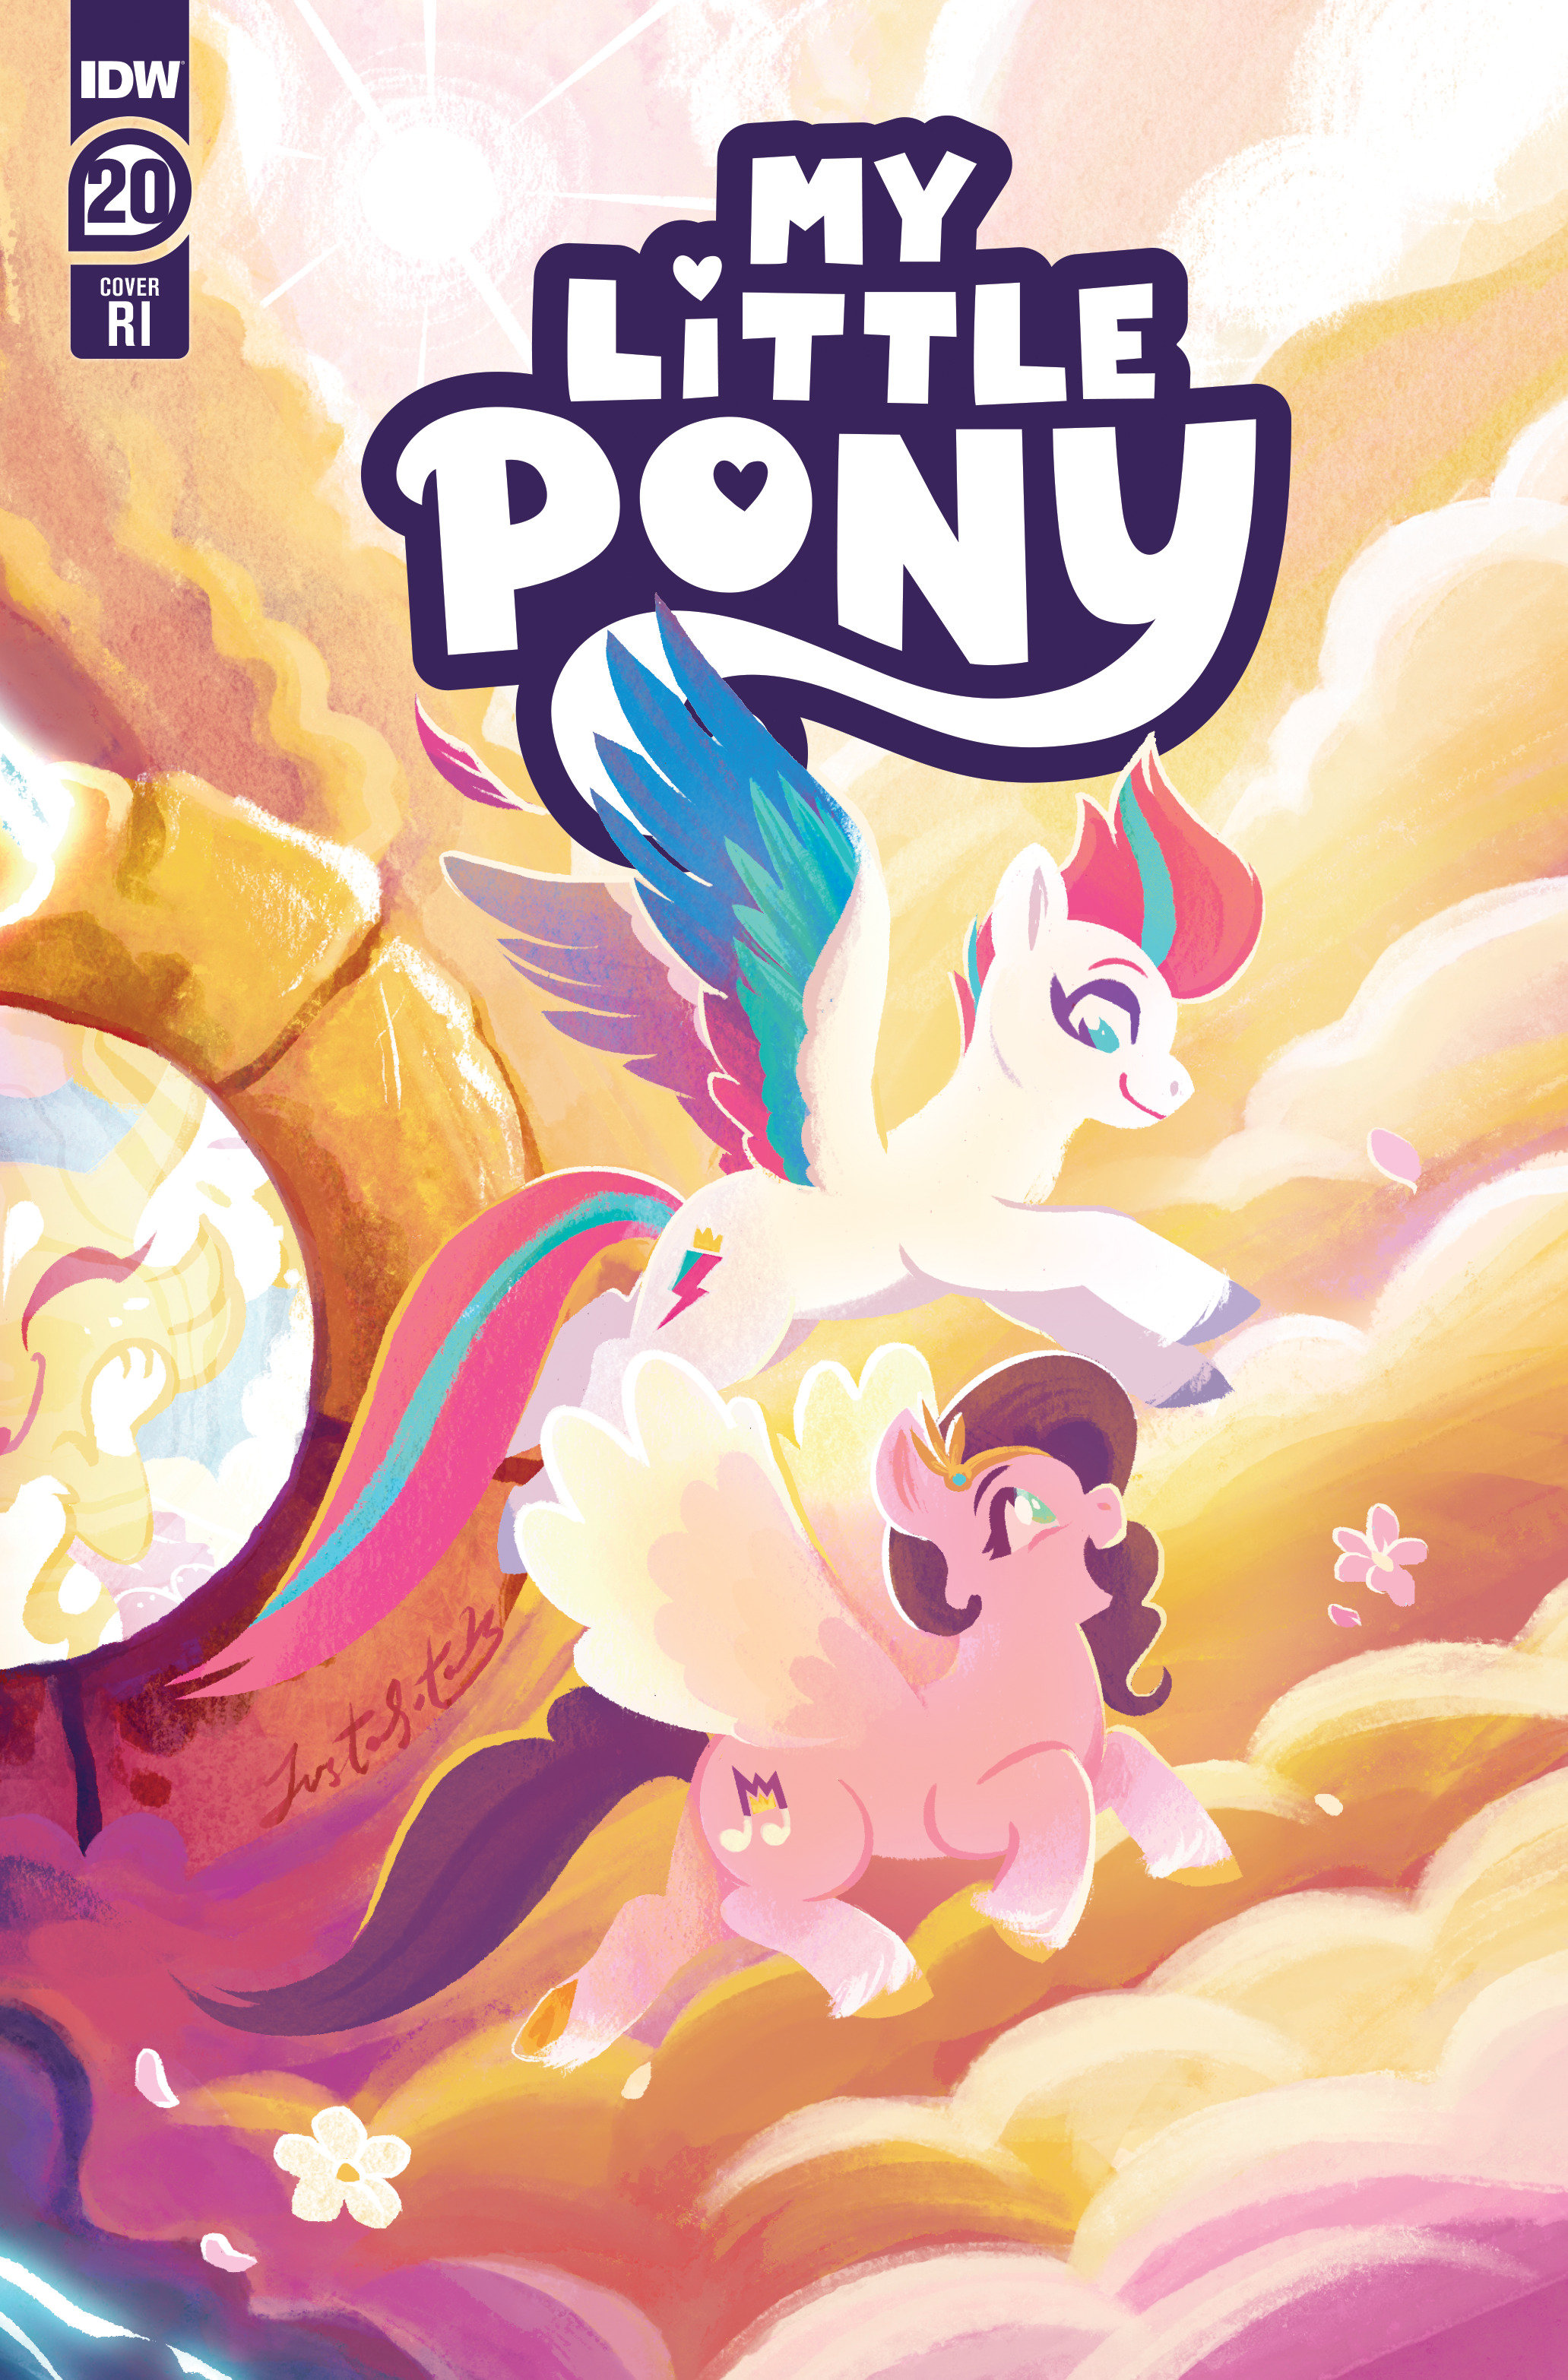 My Little Pony #20 Cover Justasuta 1 for 10 Incentive